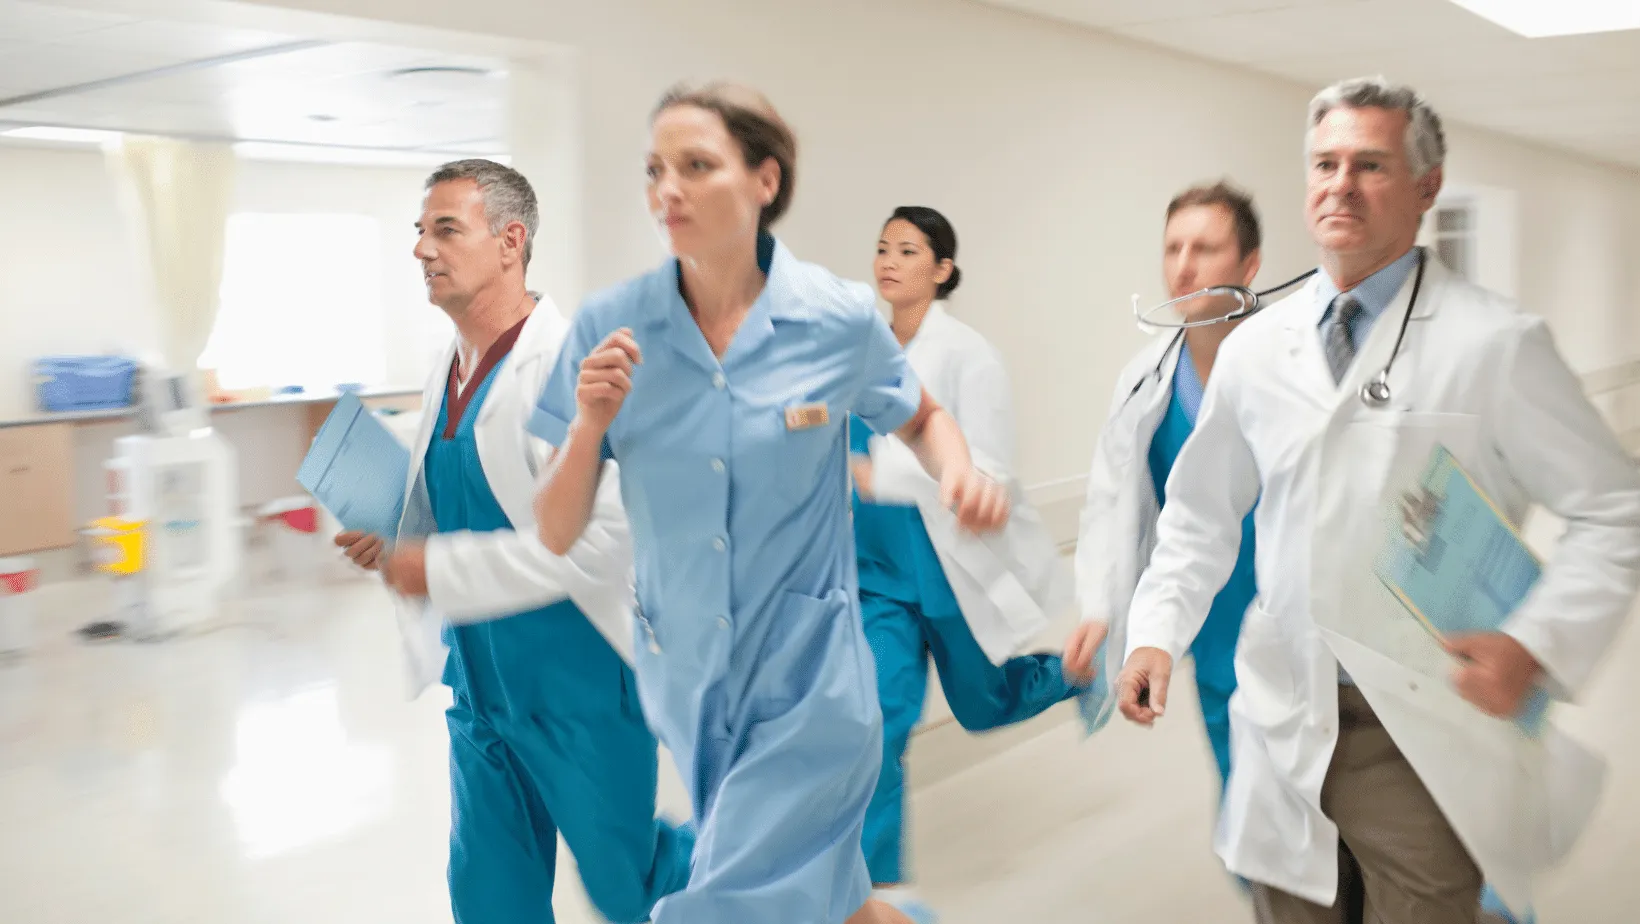 A dynamic image of a team of medical professionals, including doctors and nurses in scrubs and white coats, rushing through a hospital corridor, likely responding to an emergency.